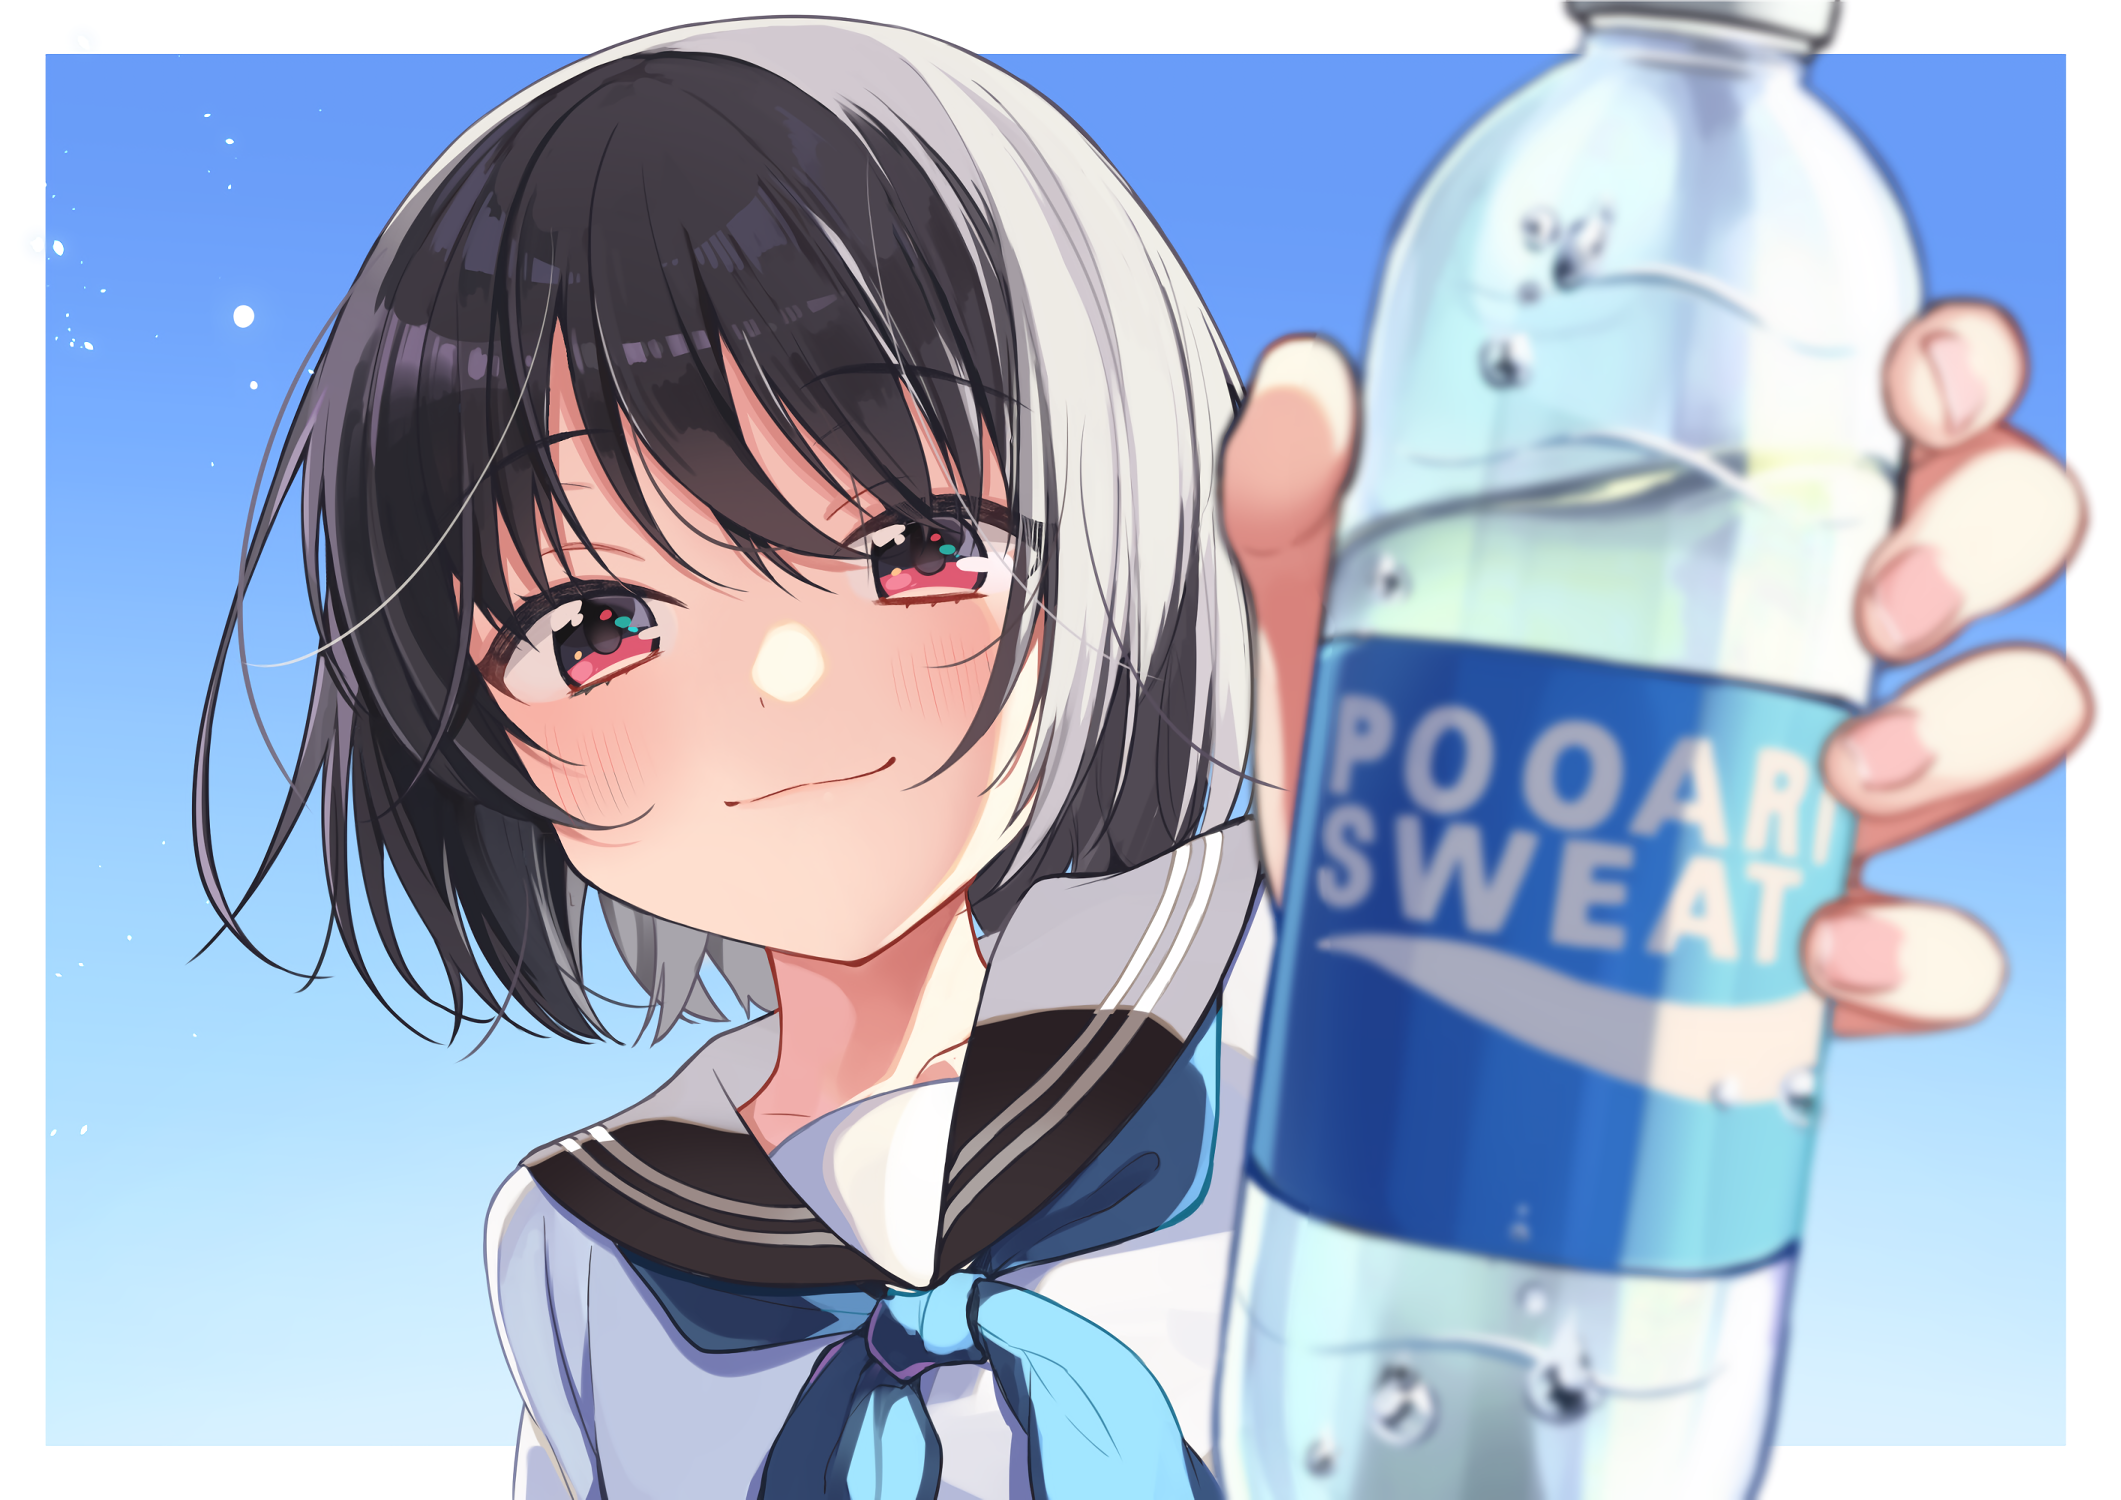 Do you want water? by しぐれうい